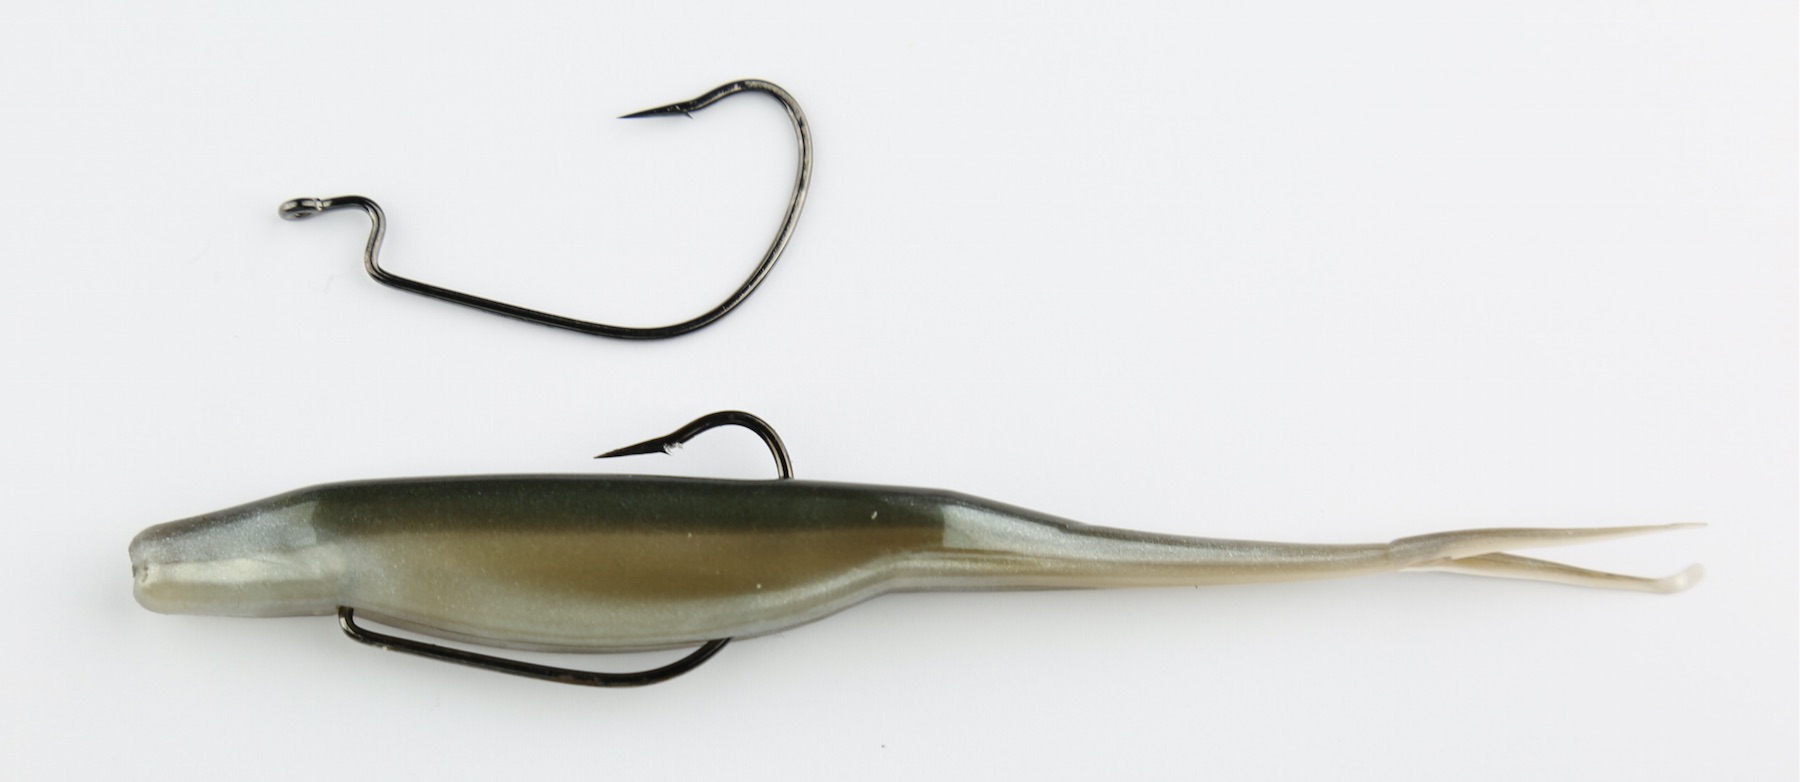 How To Choose The Best Hook For Soft Plastic Jerkbaits [Comparison]